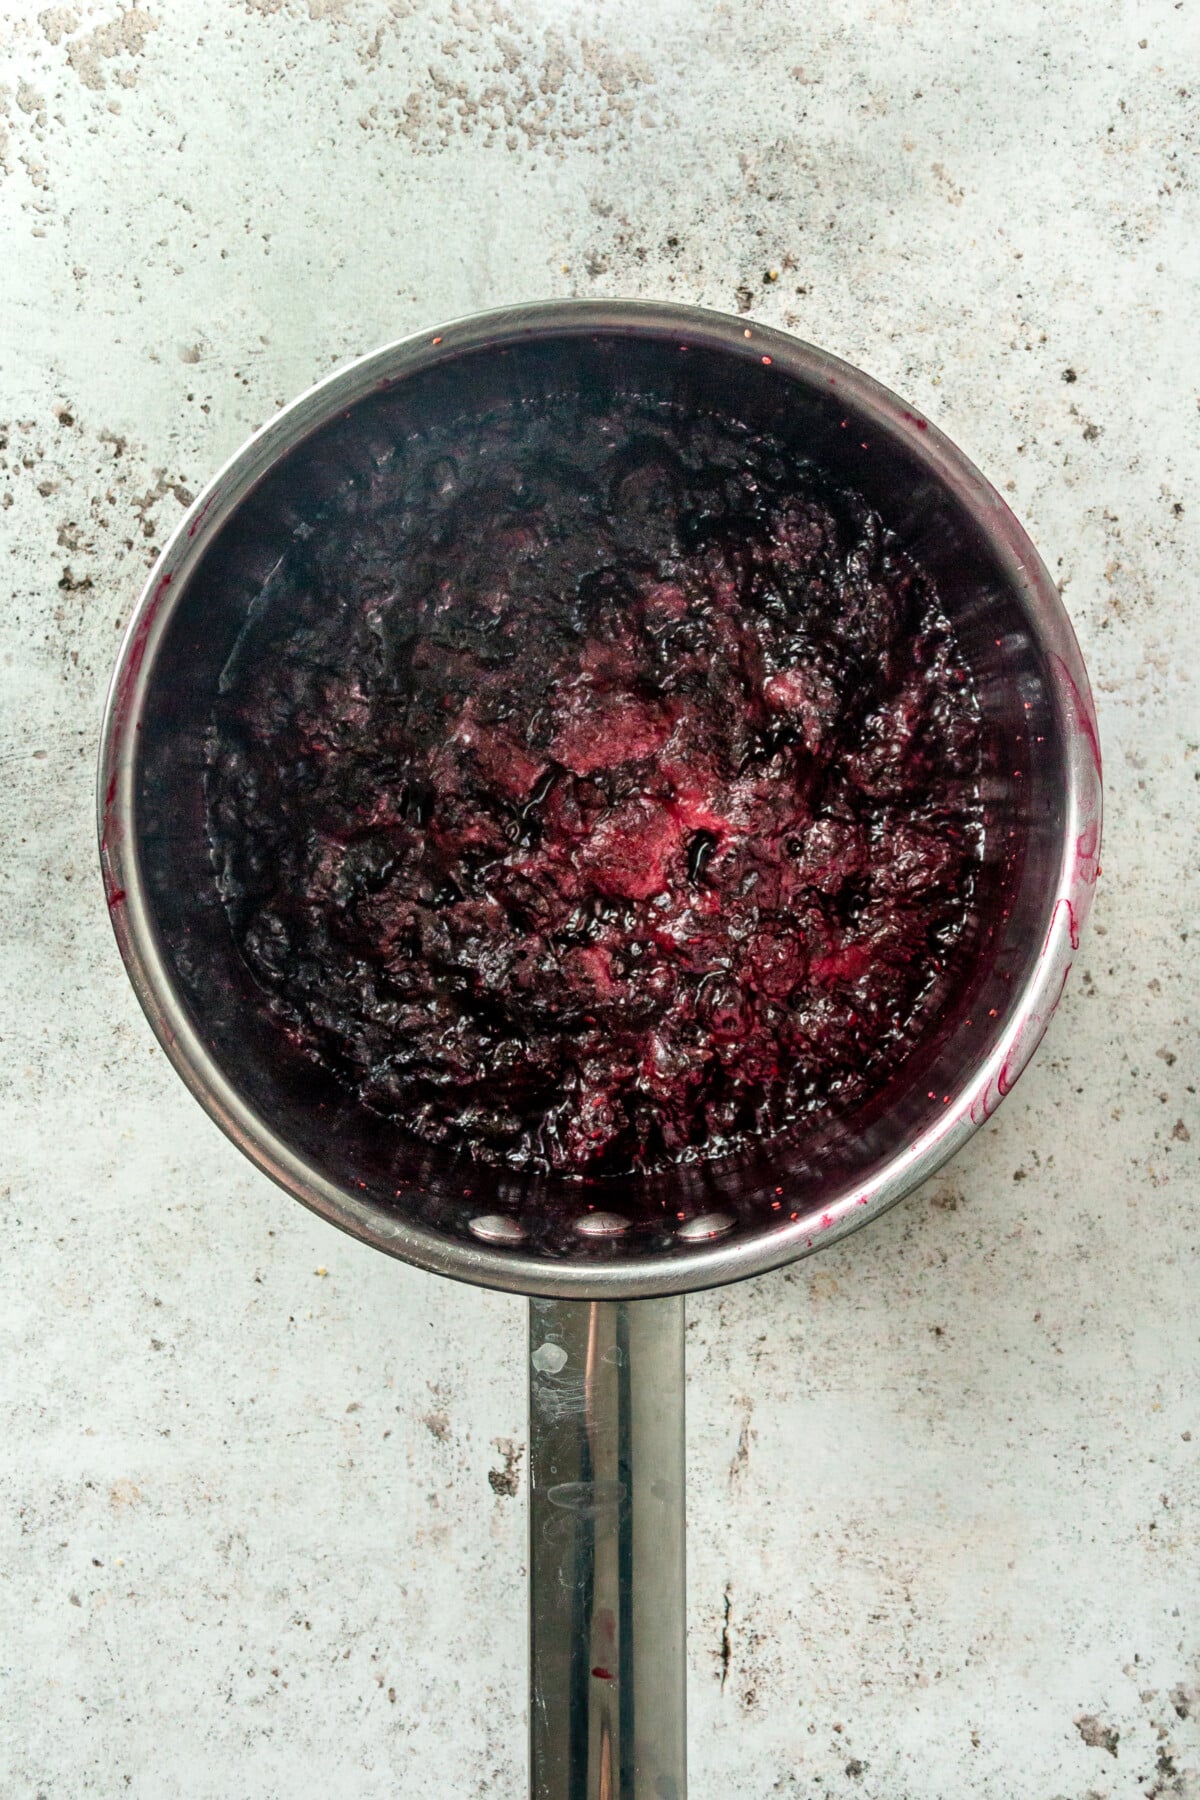 The berries are shown being cooked in the metal pot to create a dark purple mixture.